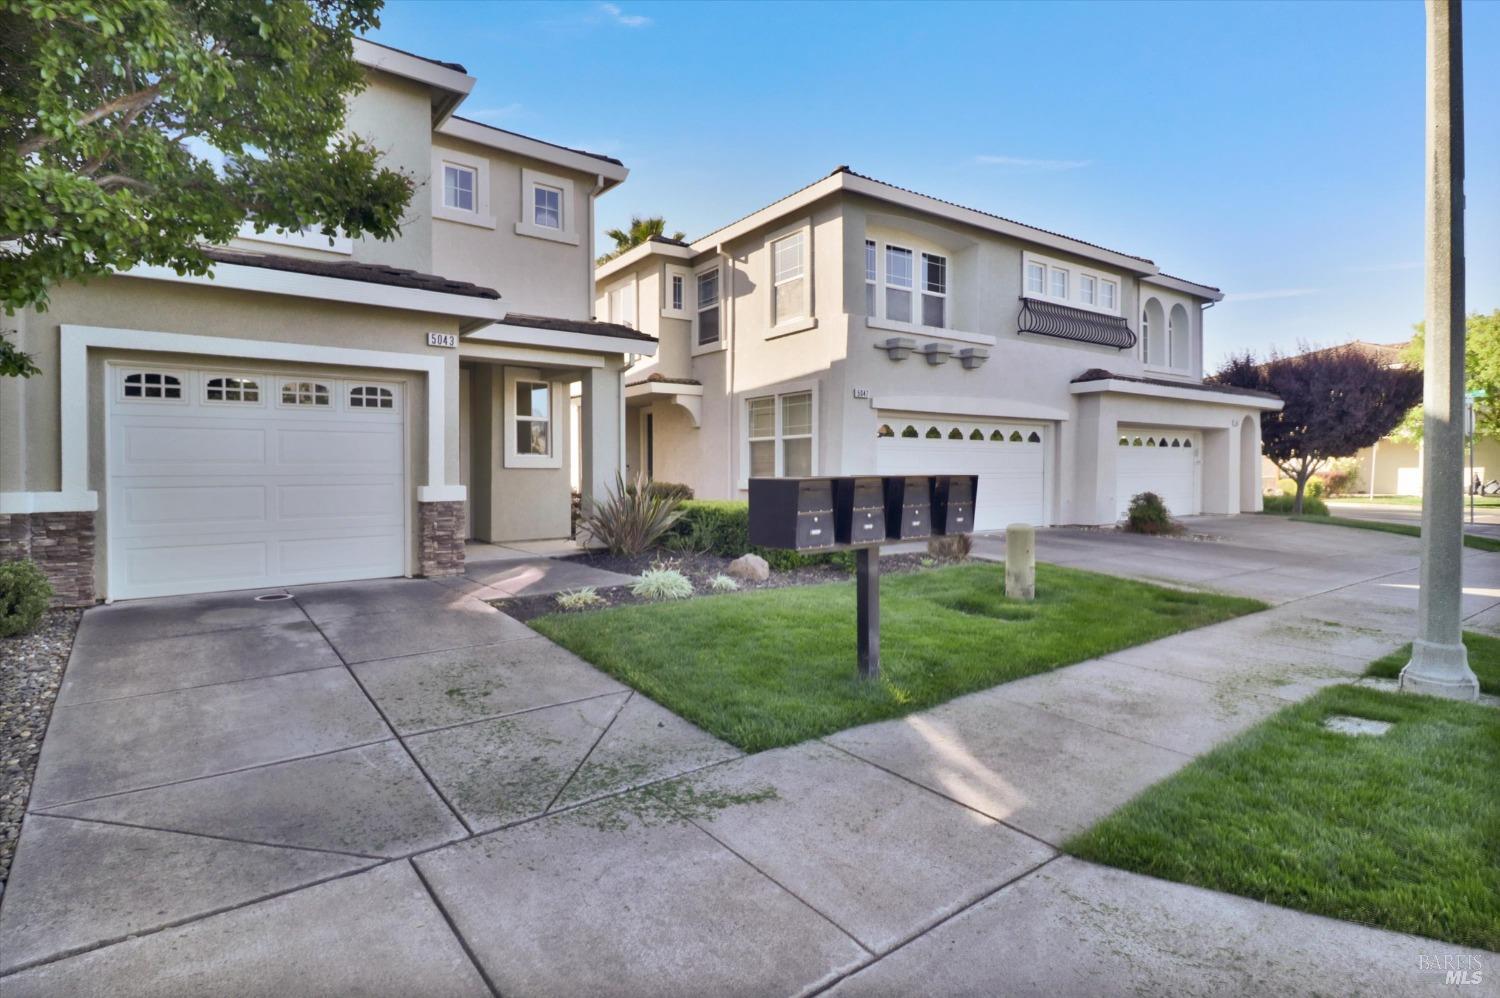 Photo of 5043 Lakeshore Dr in Fairfield, CA